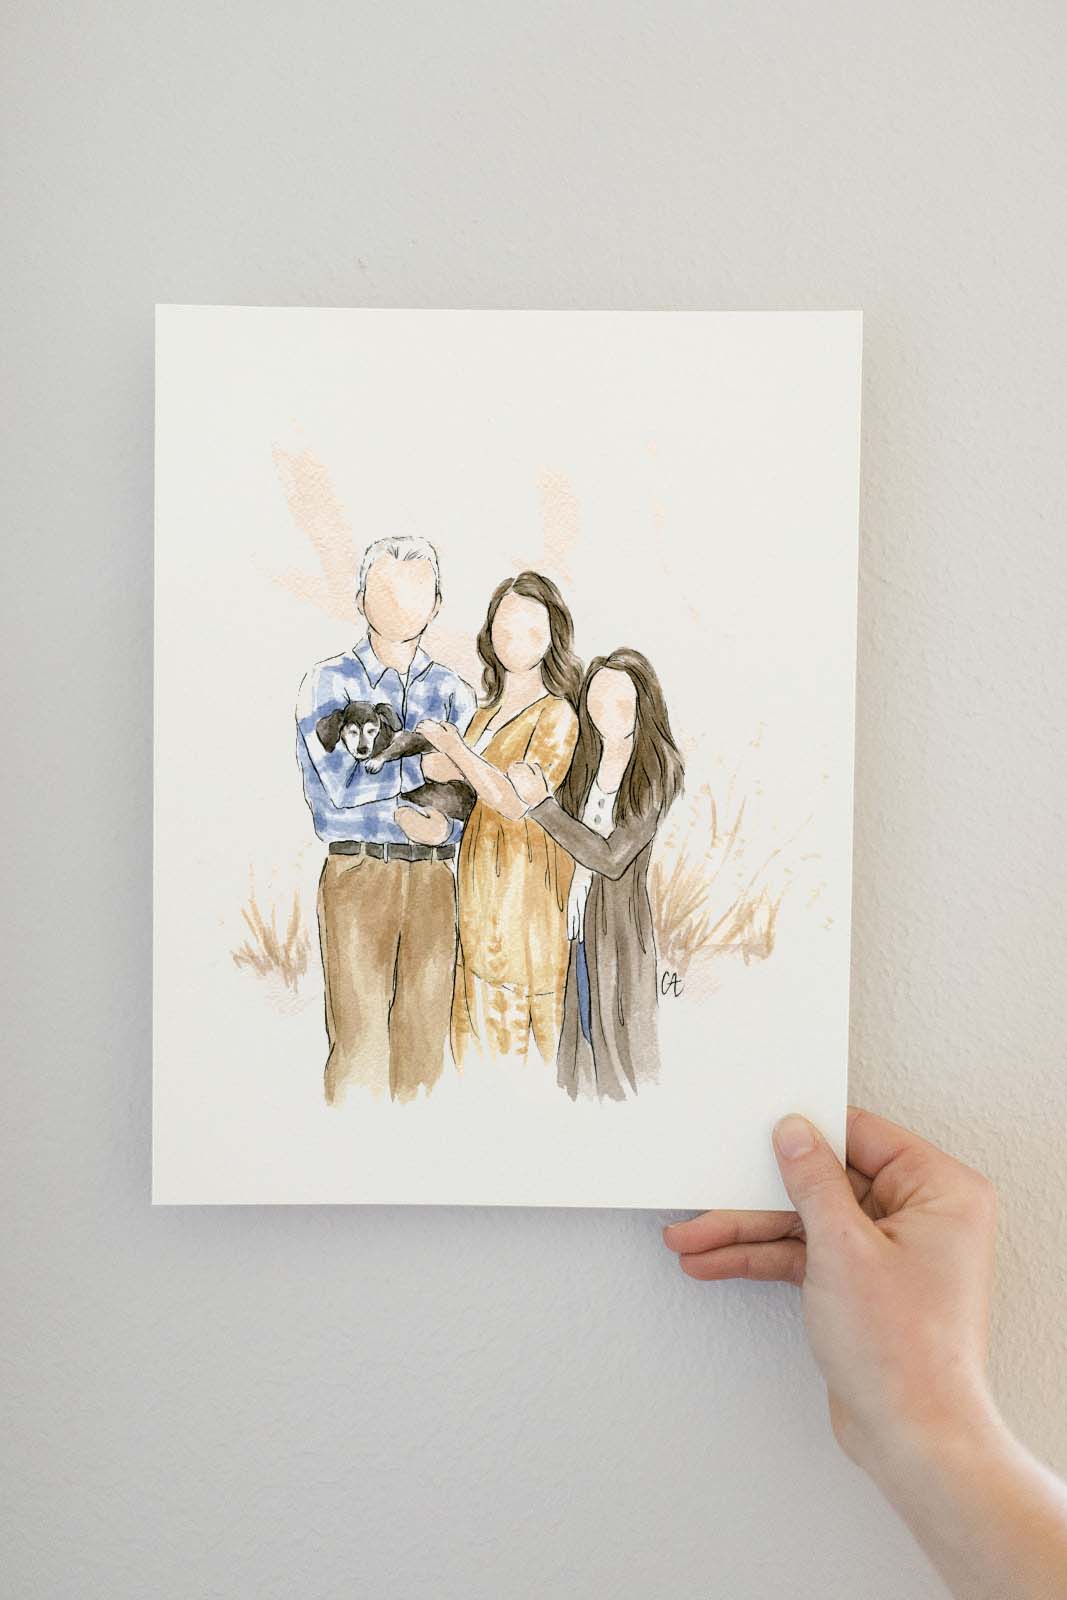 Faceless watercolor family portrait of three with dog, painted from photo with vignette background and detailed outfits, gift for mom and dad on mother's day or father's day | Custom Watercolor Wedding Invitations, Dallas, Texas | By Caroline Ann